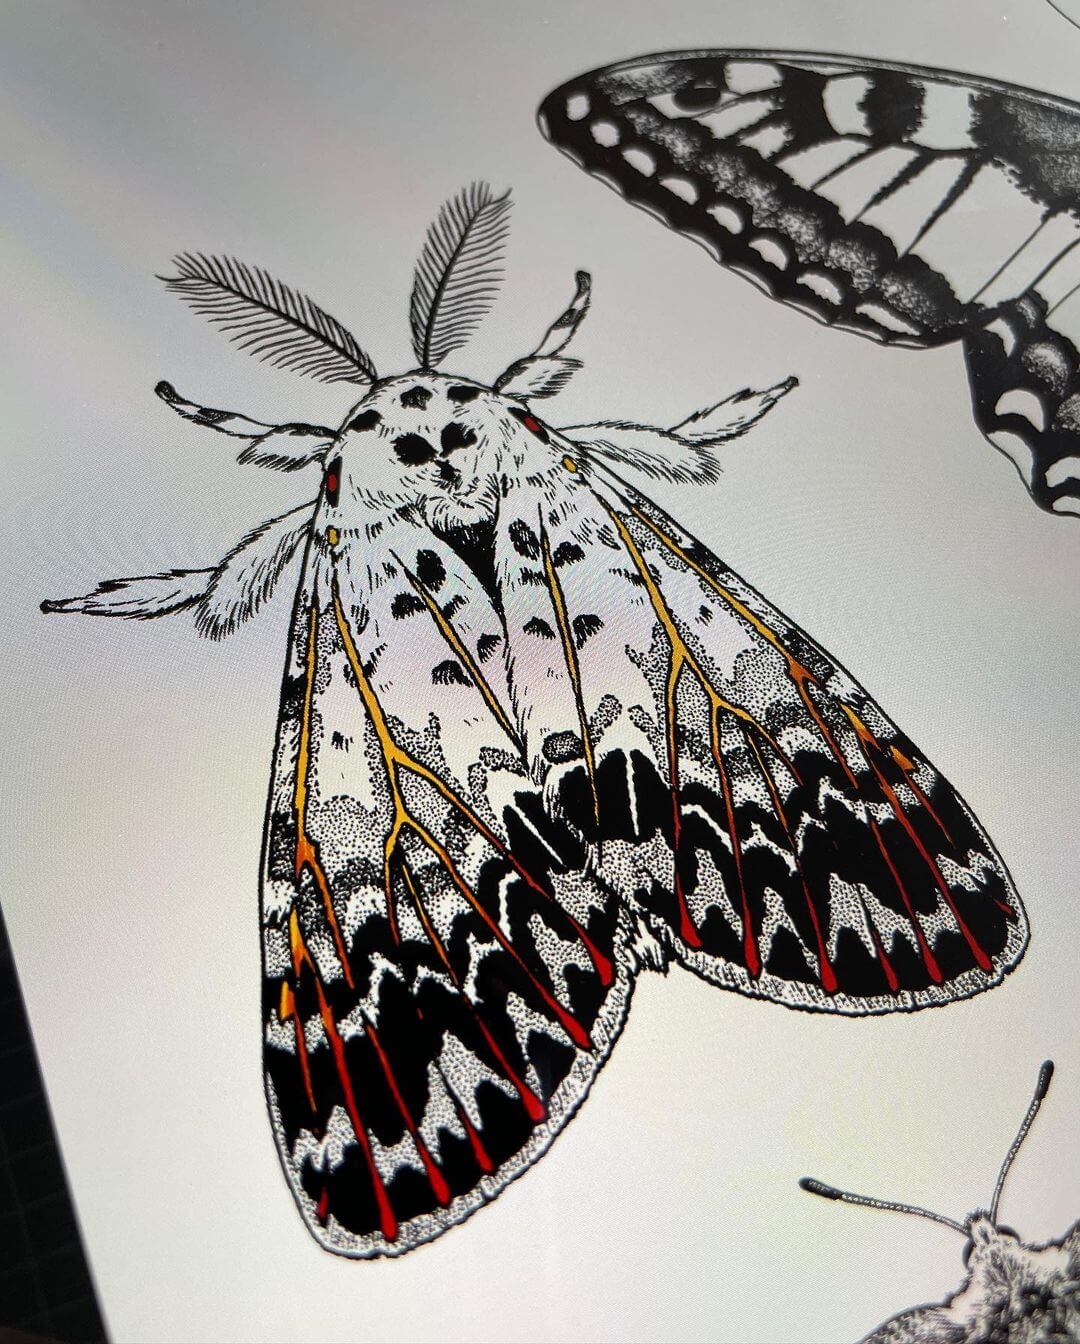 1. Drawing of a moth on white paper with patterned wings.